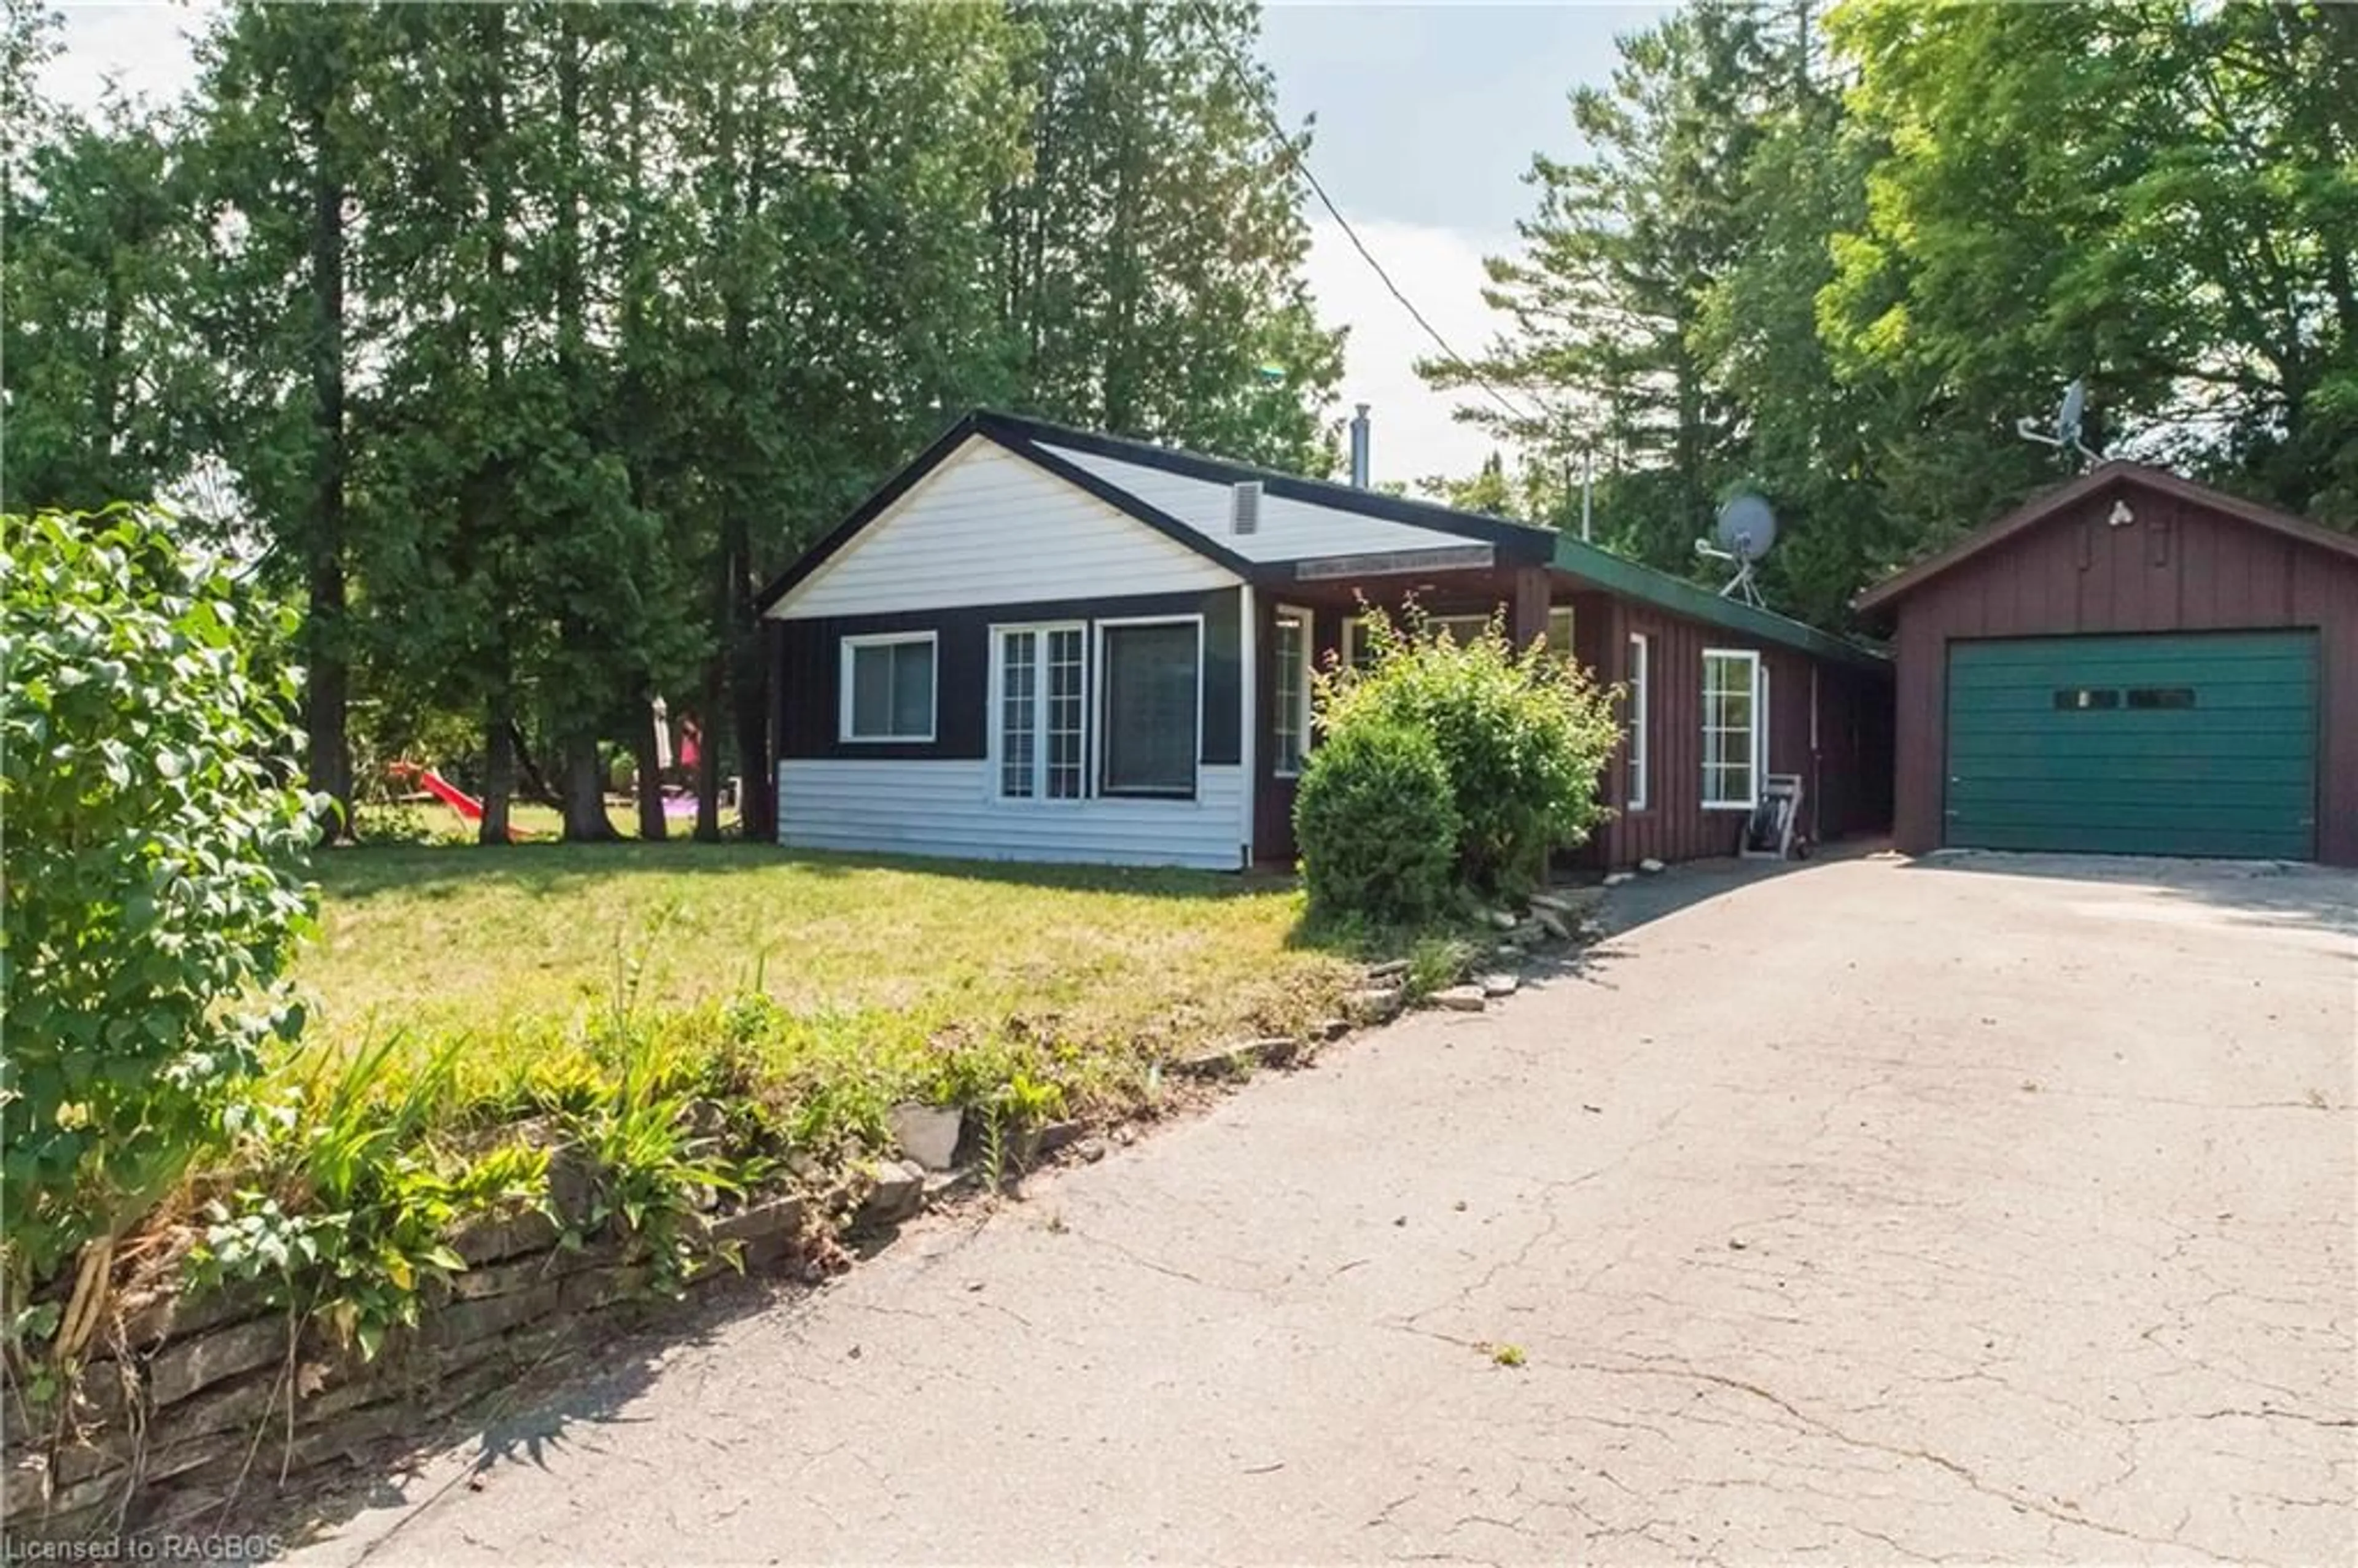 Cottage for 1248 Sauble Falls Rd, Sauble Beach Ontario N0H 2G0